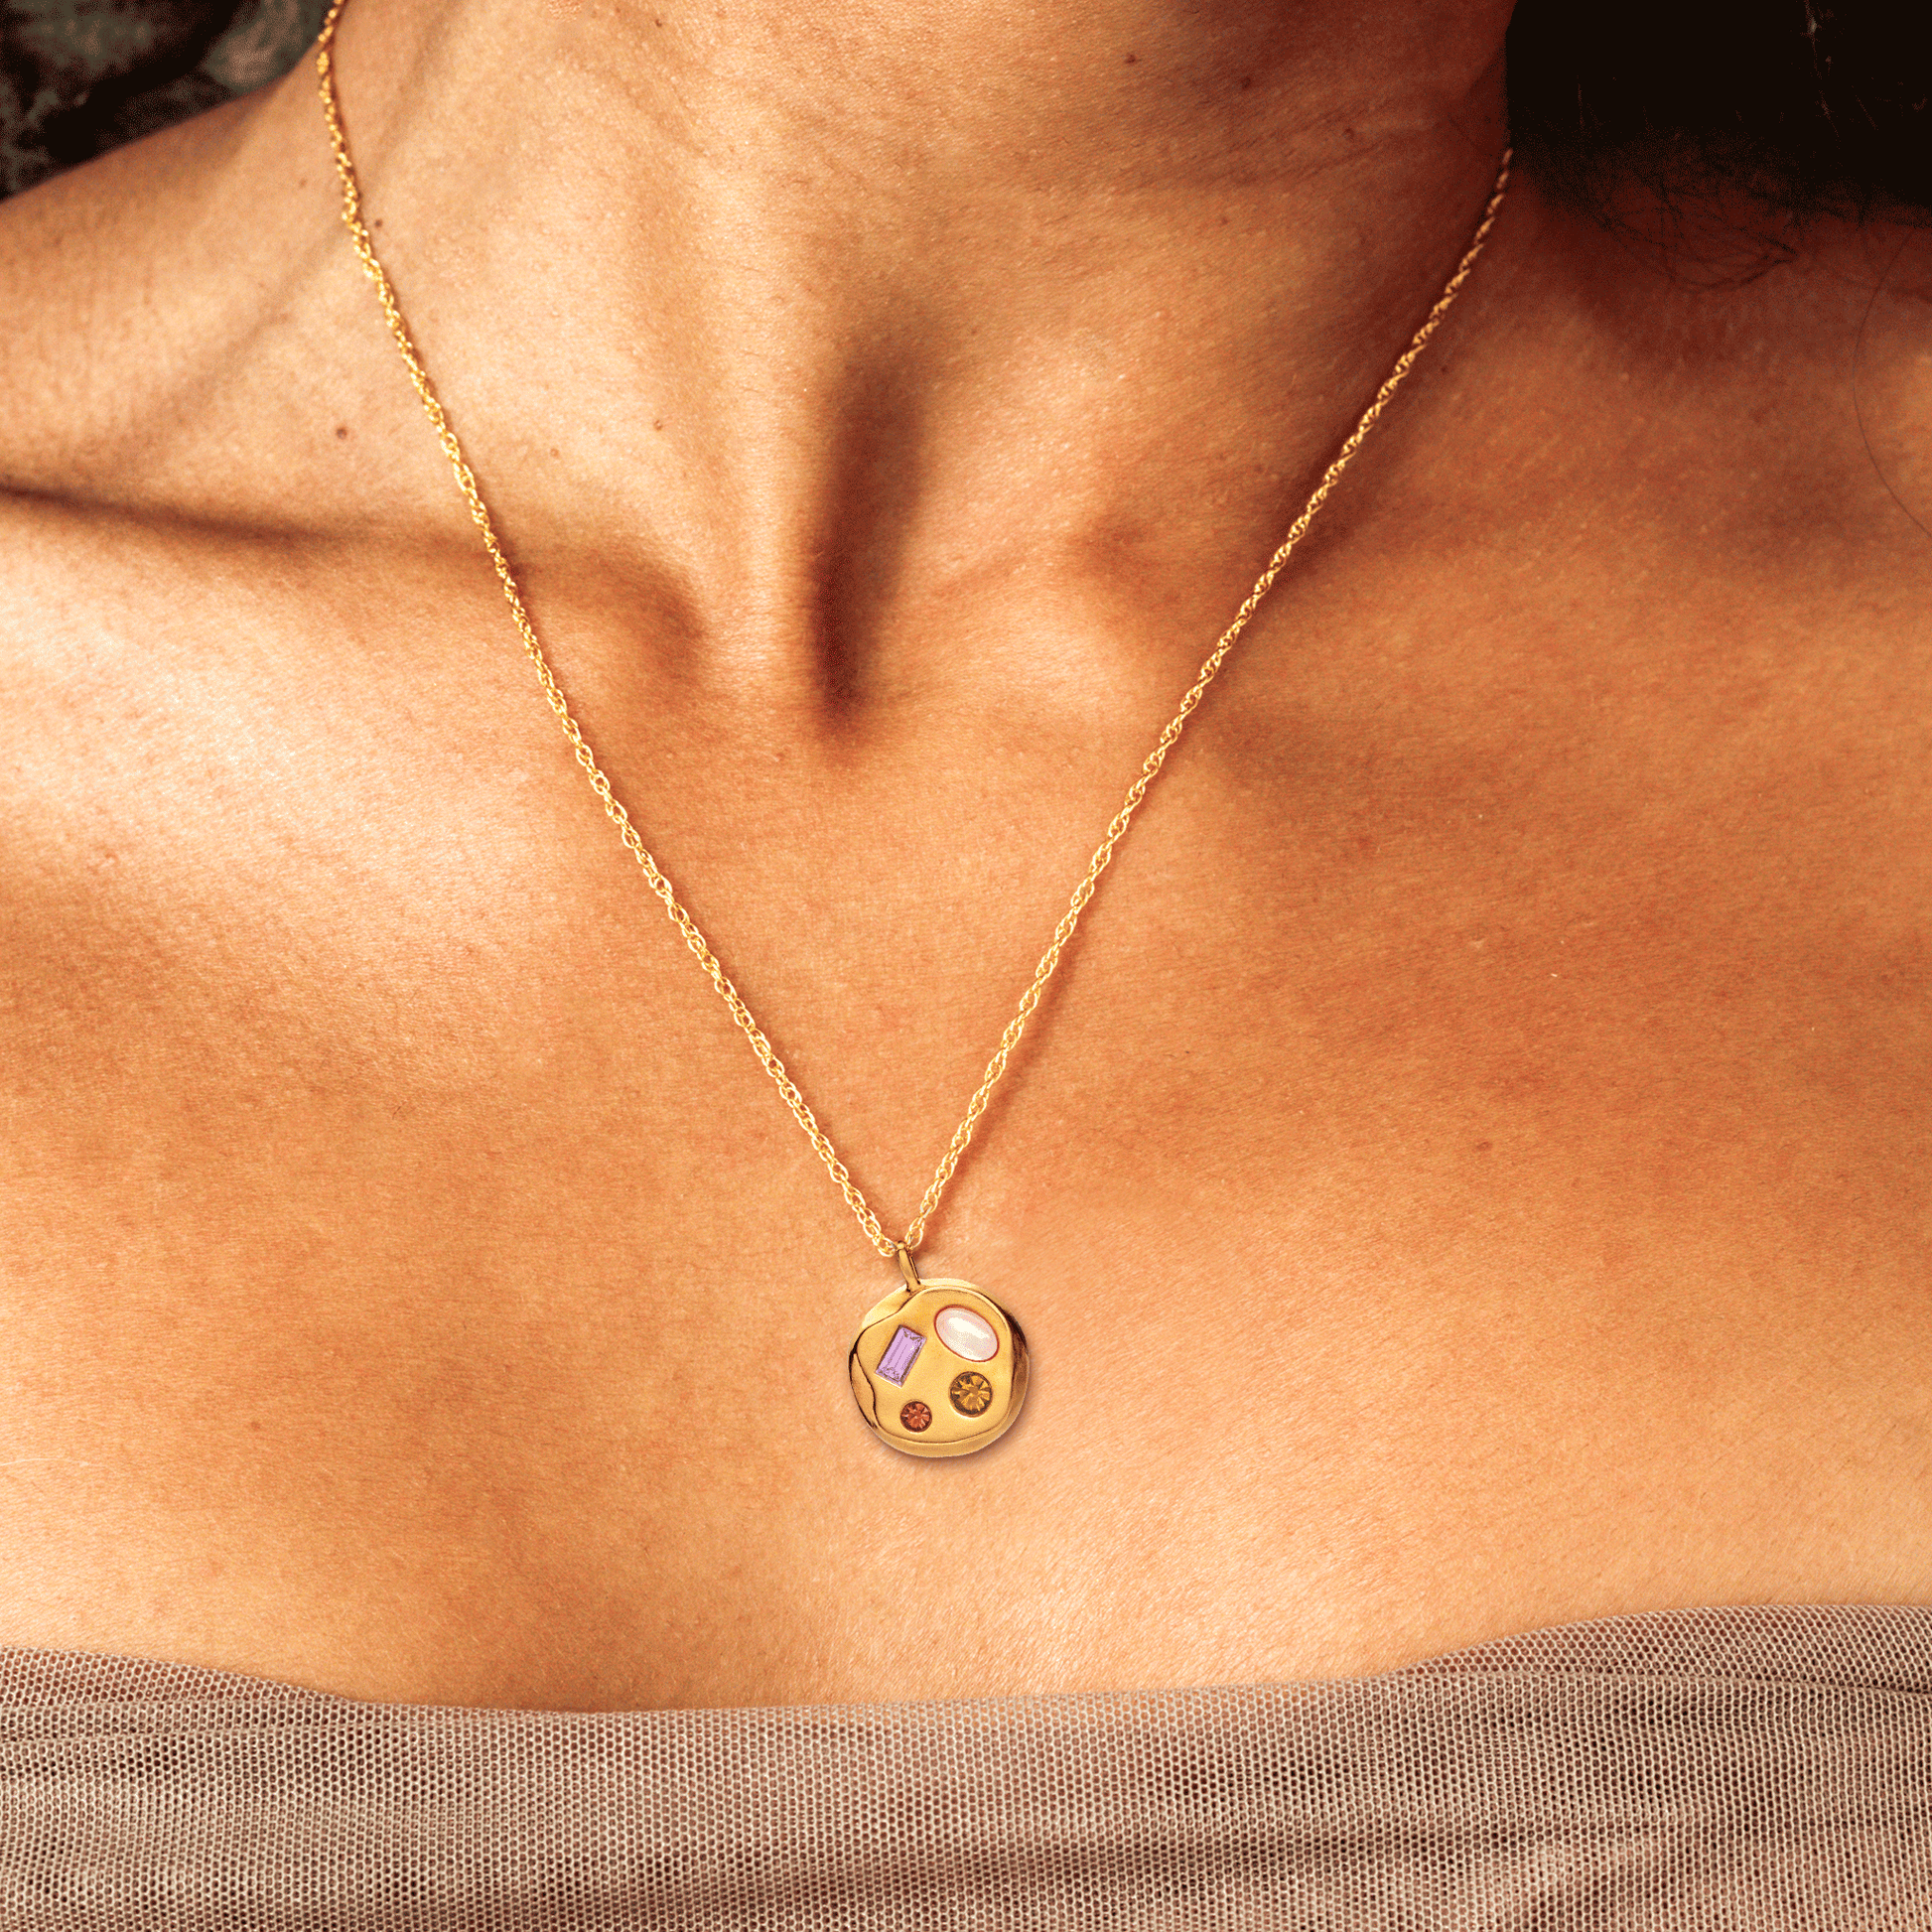 Person wearing The February Sixth Pendant